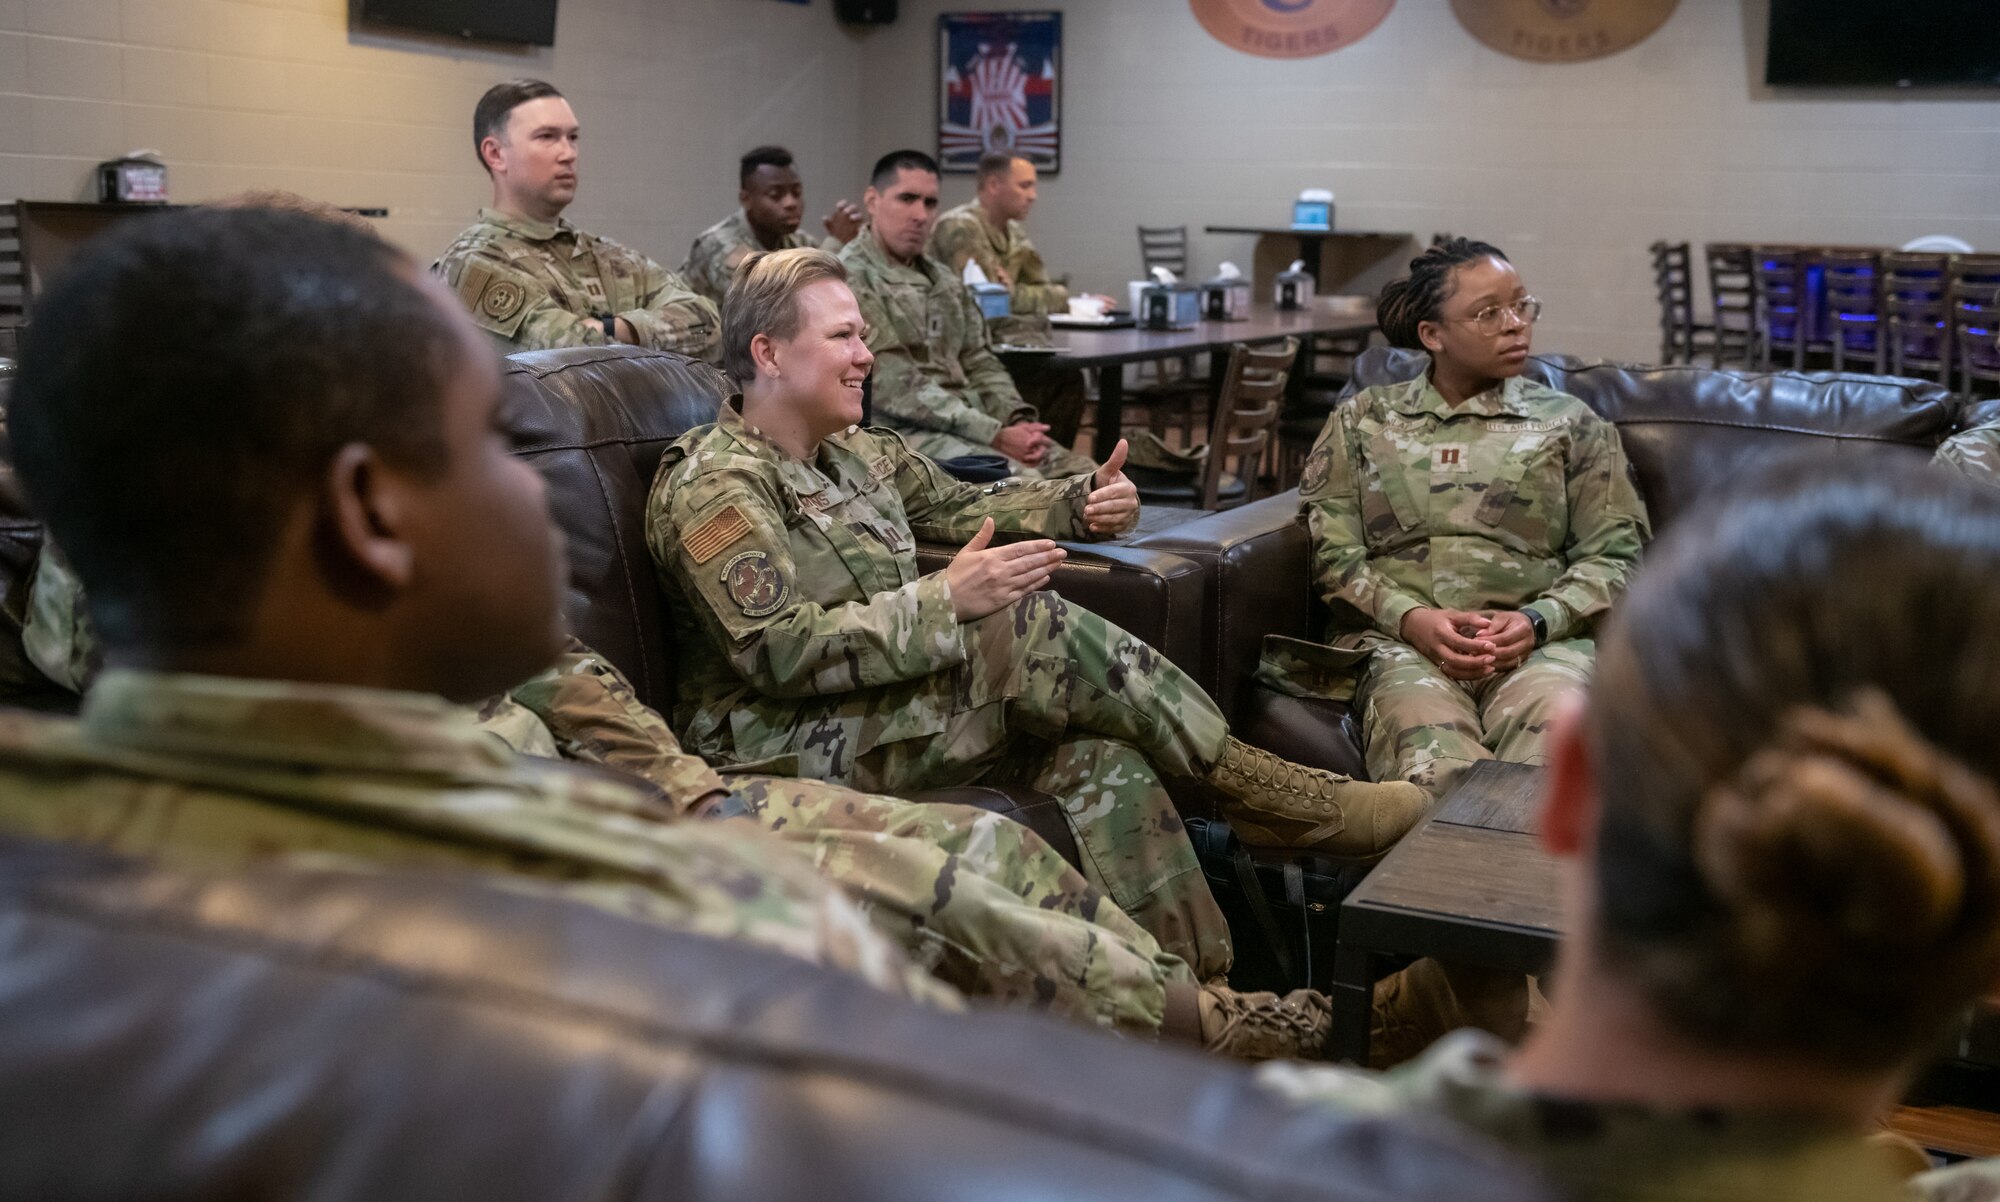 U.S. Air Force Capt. Tanja Clemons, 81st Healthcare Operations Squadron clinic nurse, participates in discussion with base leadership during a company grade officers mentoring session inside Gaude' Lanes at Keesler Air Force Base, Mississippi, May 16, 2022. The session allows CGO's the opportunity to receive guidance and ask questions of senior leaders to help further their growth as officers. (U.S. Air Force Photo by Andre' Askew)